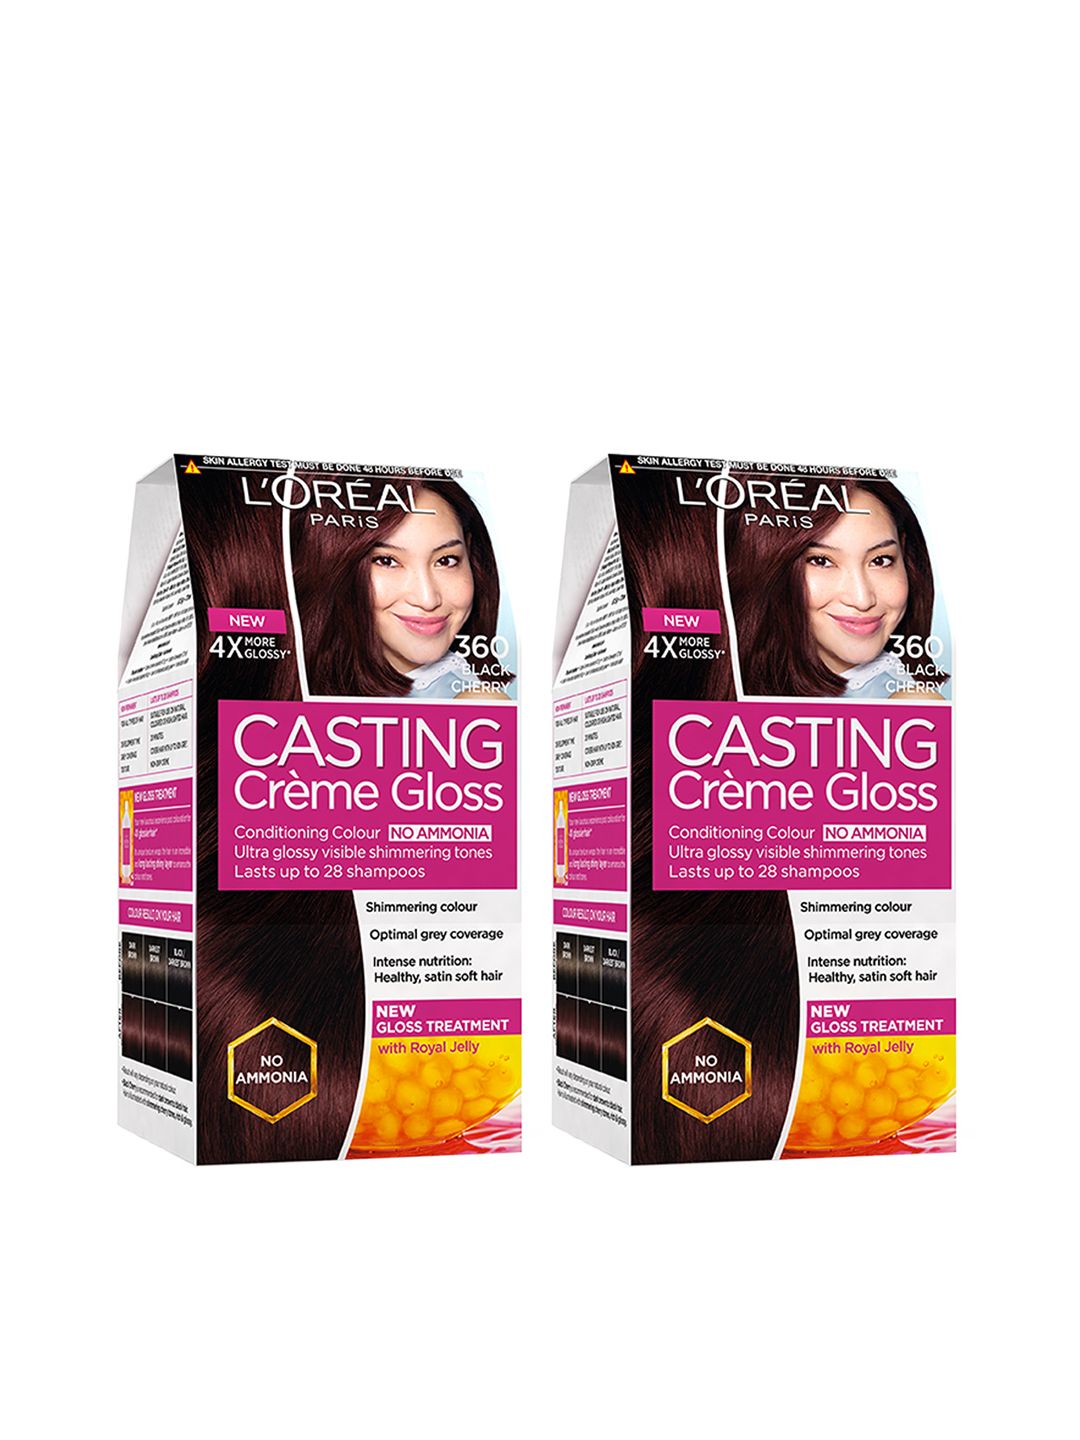 LOreal Paris Set of 2 Casting Creme Gloss Hair Colors Black Cherry 360 Price in India